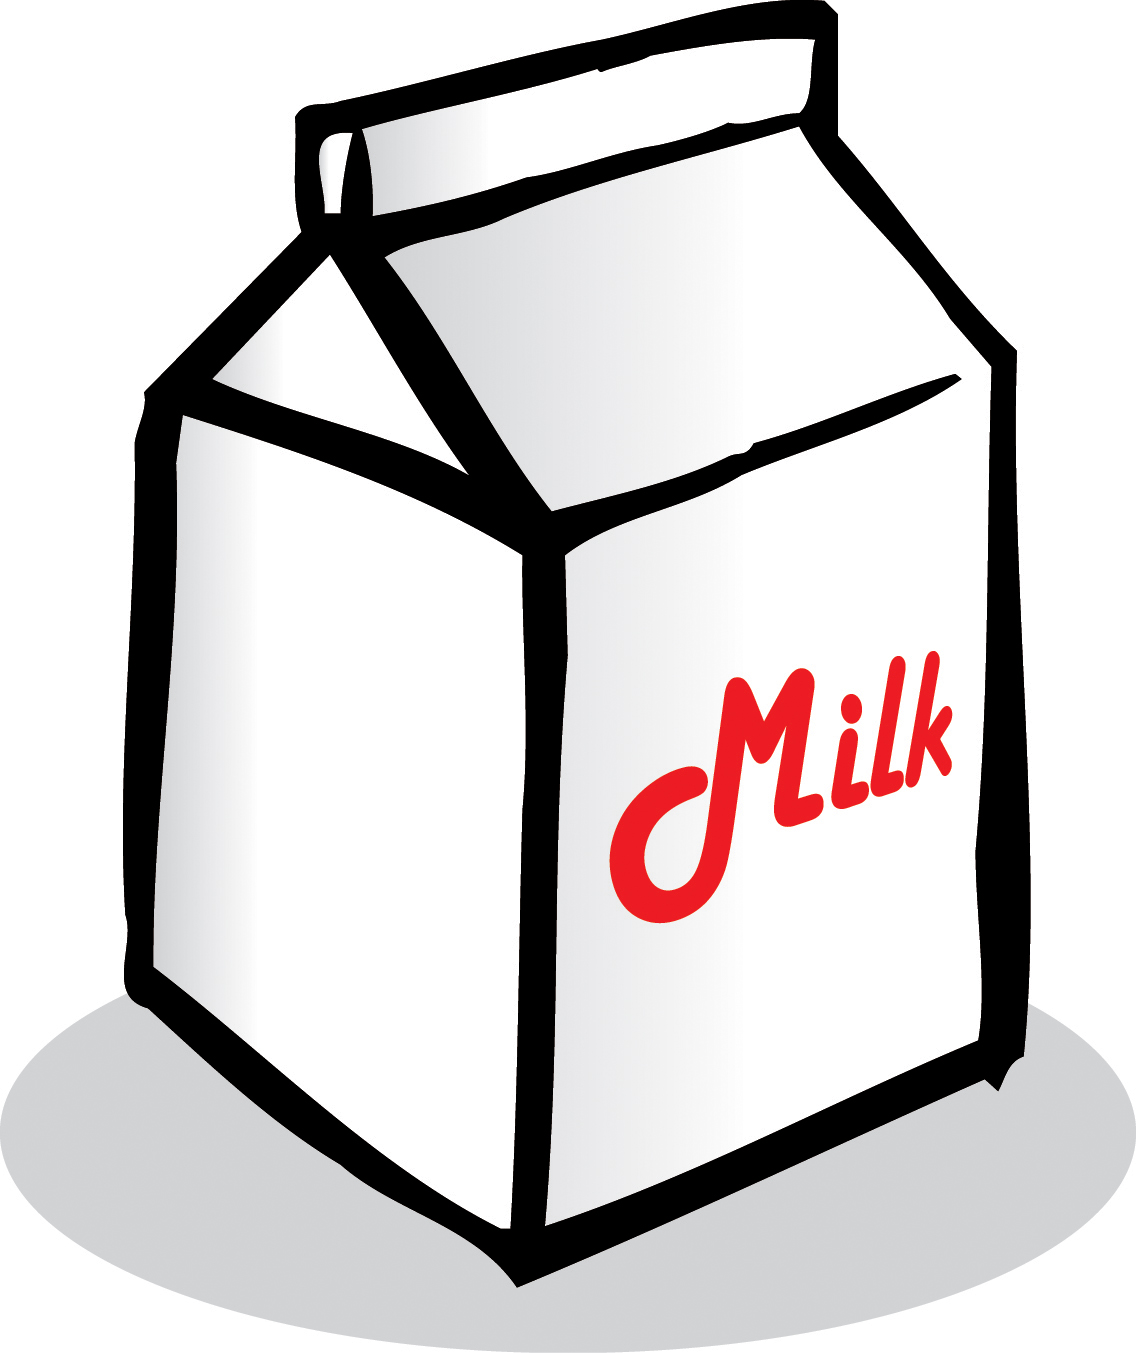 14 Milk Carton Cartoon Free Cliparts That You Can Download To You